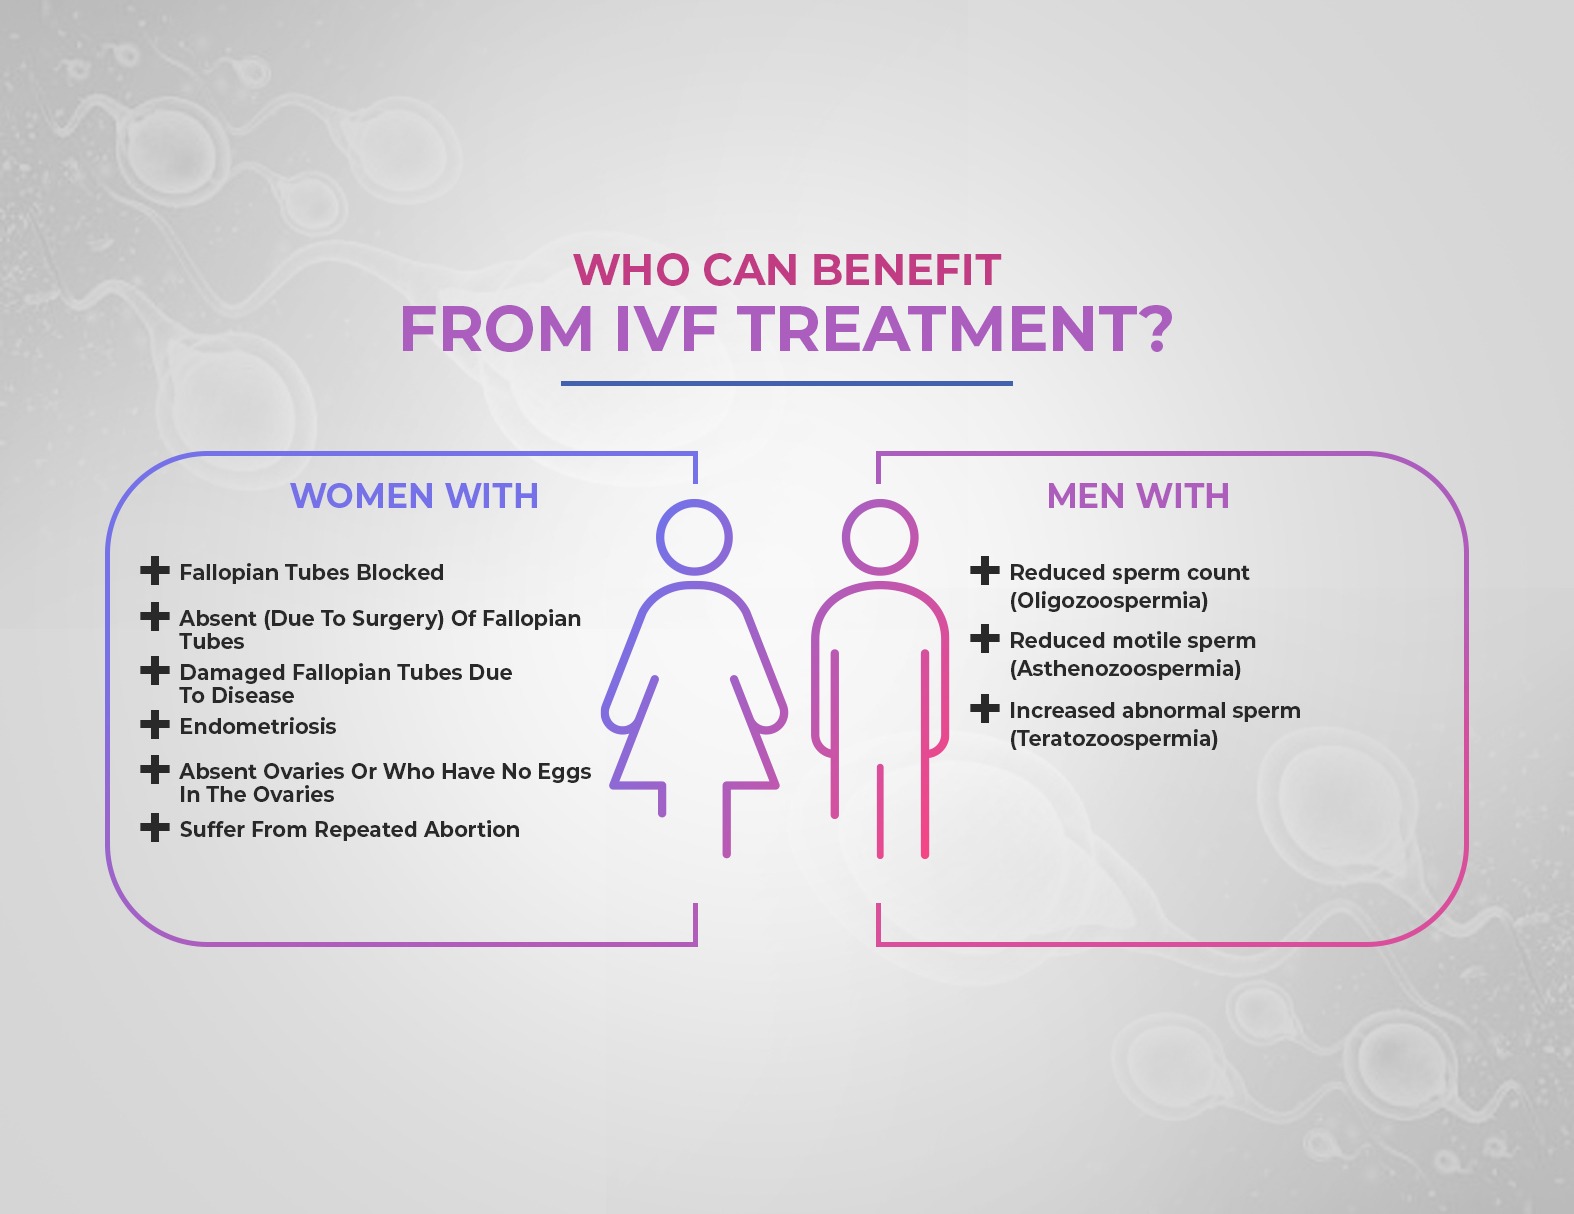 Patient Eligibility for IVF Treatment